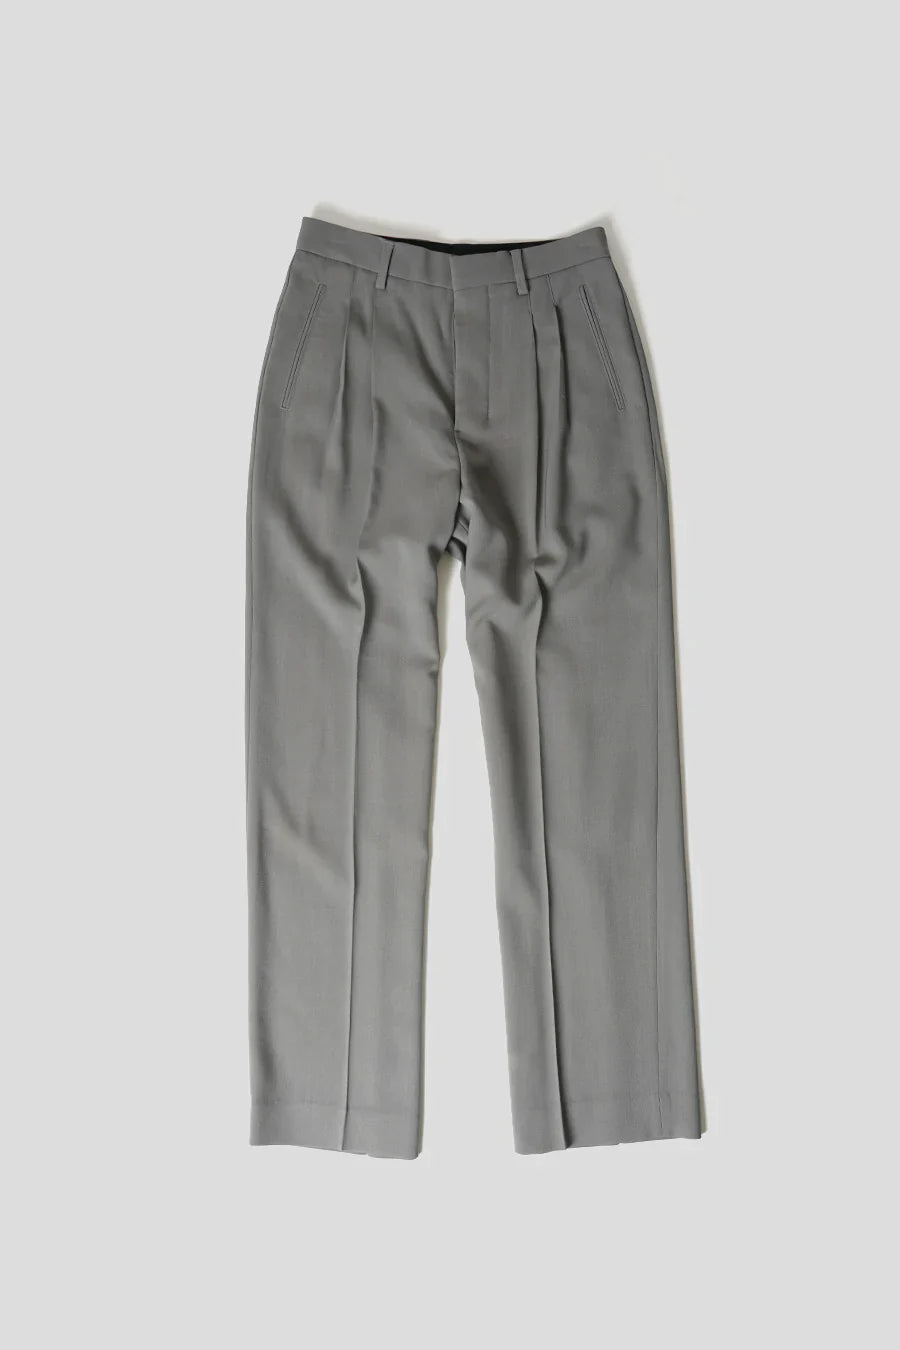 AMI PARIS - STRAIGHT FIT TAUPE TROUSERS - LE LABO STORE